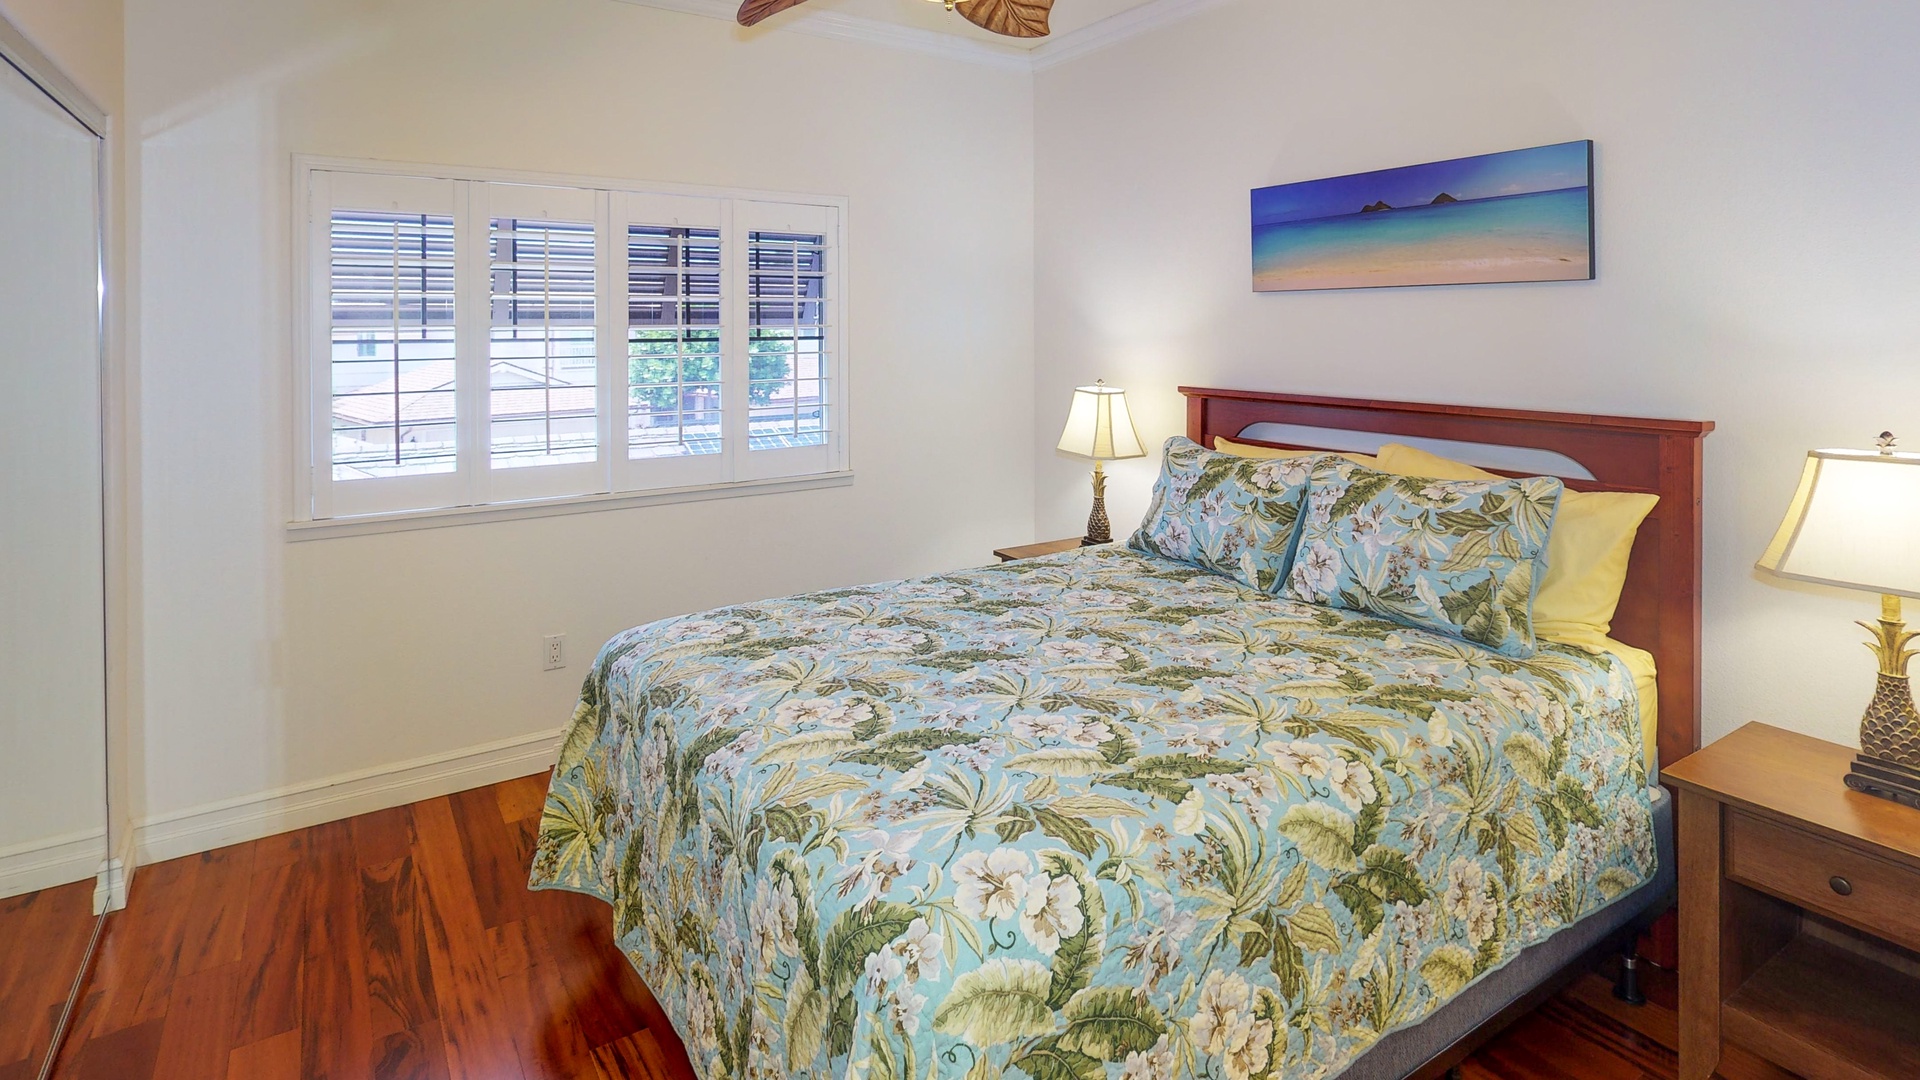 Kapolei Vacation Rentals, Coconut Plantation 1200-4 - The guest bedroom has queen size bed, ceiling fan and natural light.